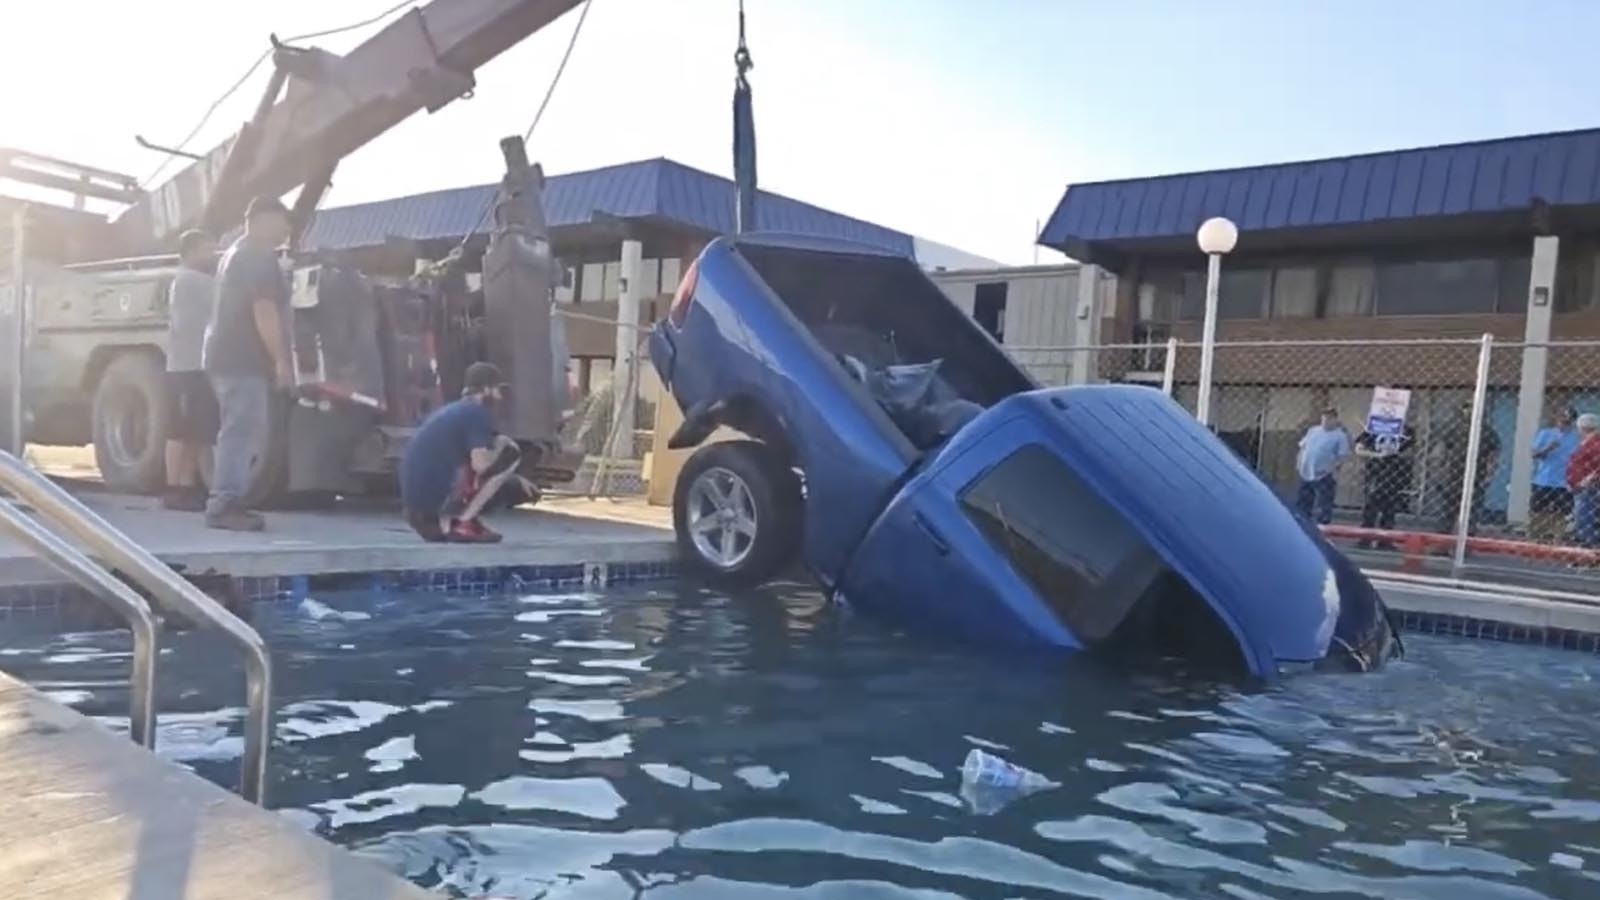 A wrecker pulls a large Dodge Ram truck out of the outdoor pool at the National 9 motel in Gillette.